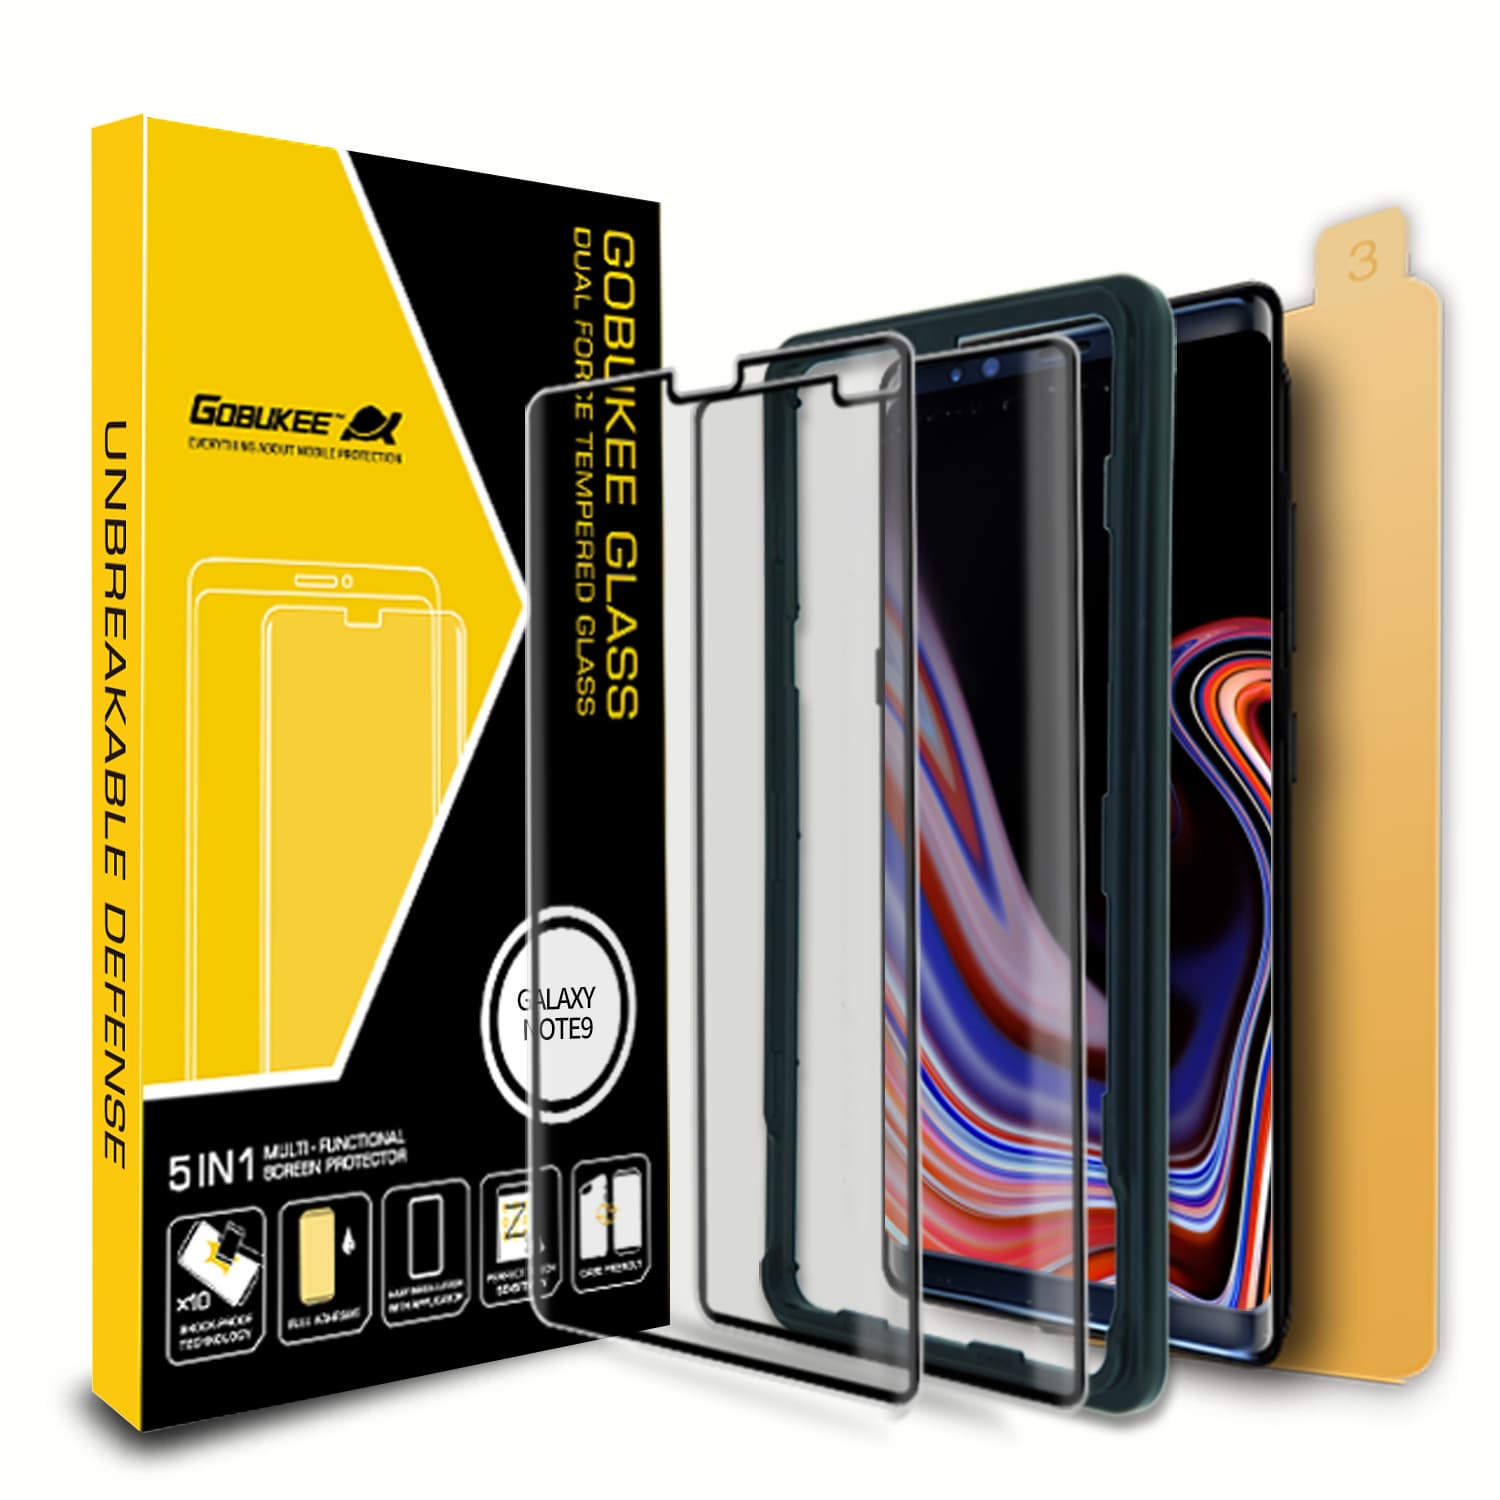 GOBUKEE ULTRAEDGE For Galaxy Note 8_9 double tempered glass